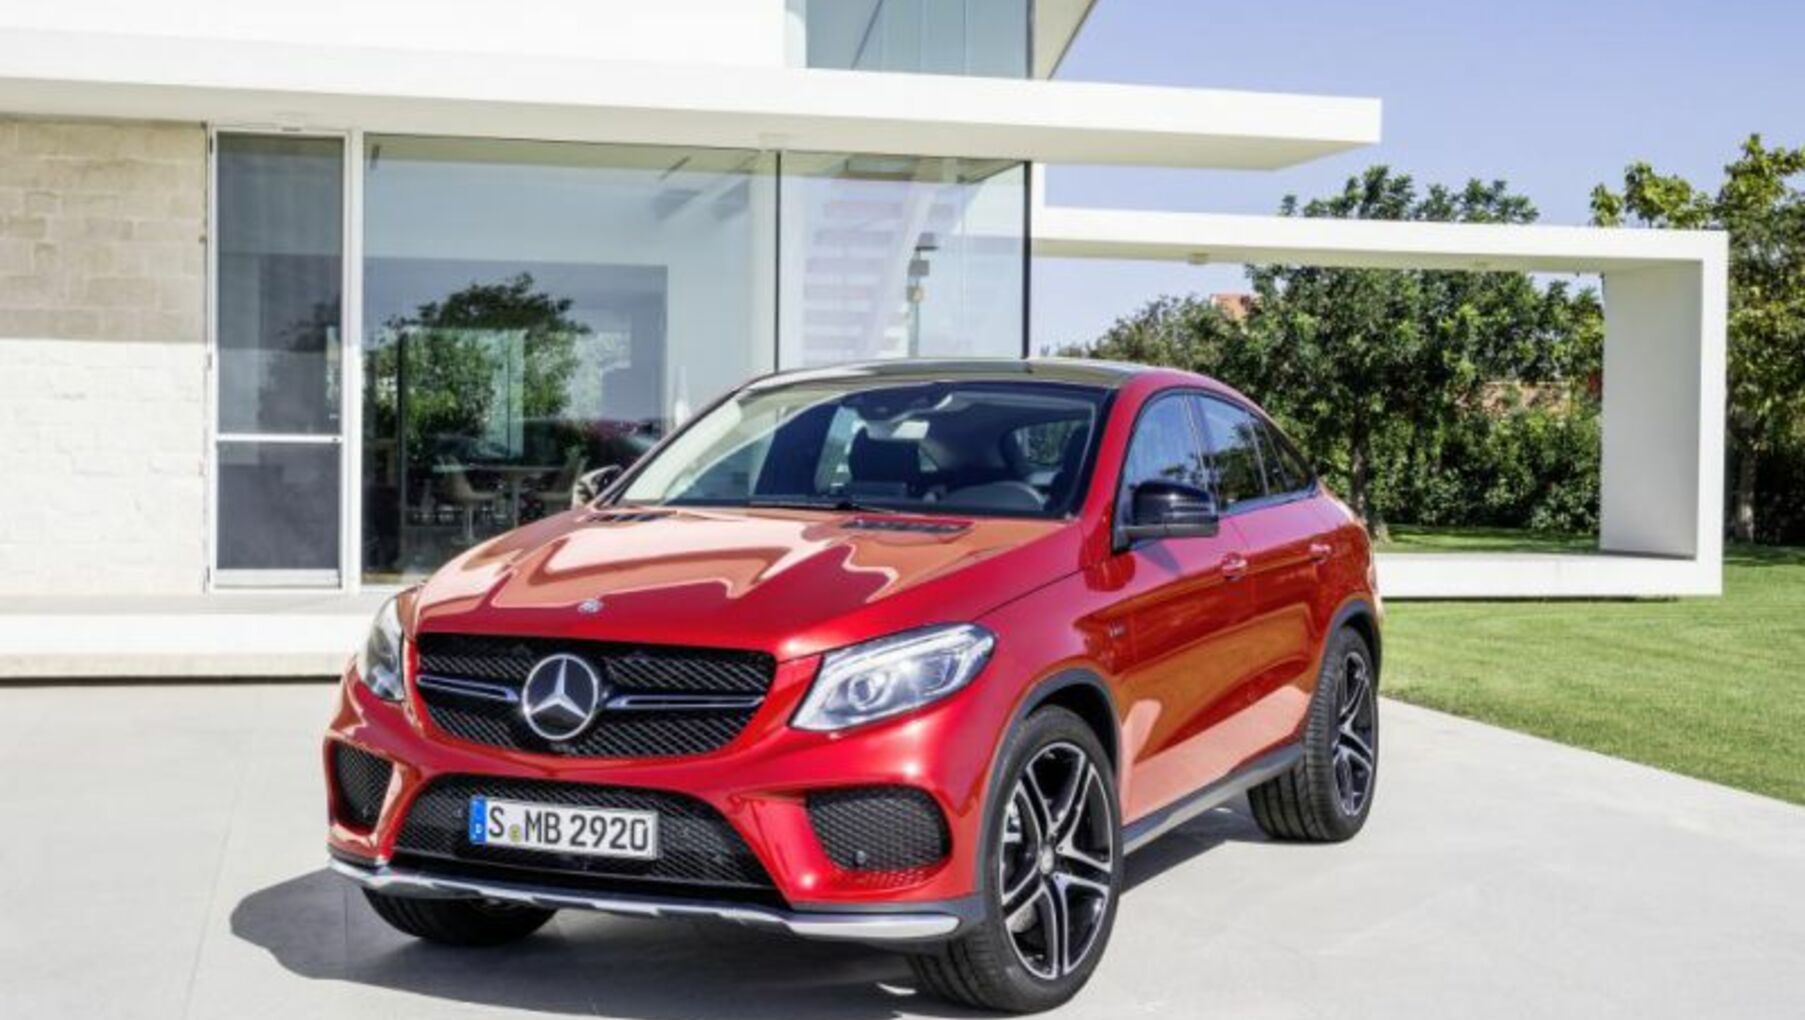 Mercedes-Benz GLE Coupe (C292) GLE 400 (333 Hp) 4MATIC G-TRONIC 2015, 2016, 2017, 2018, 2019, 2020, 2021 